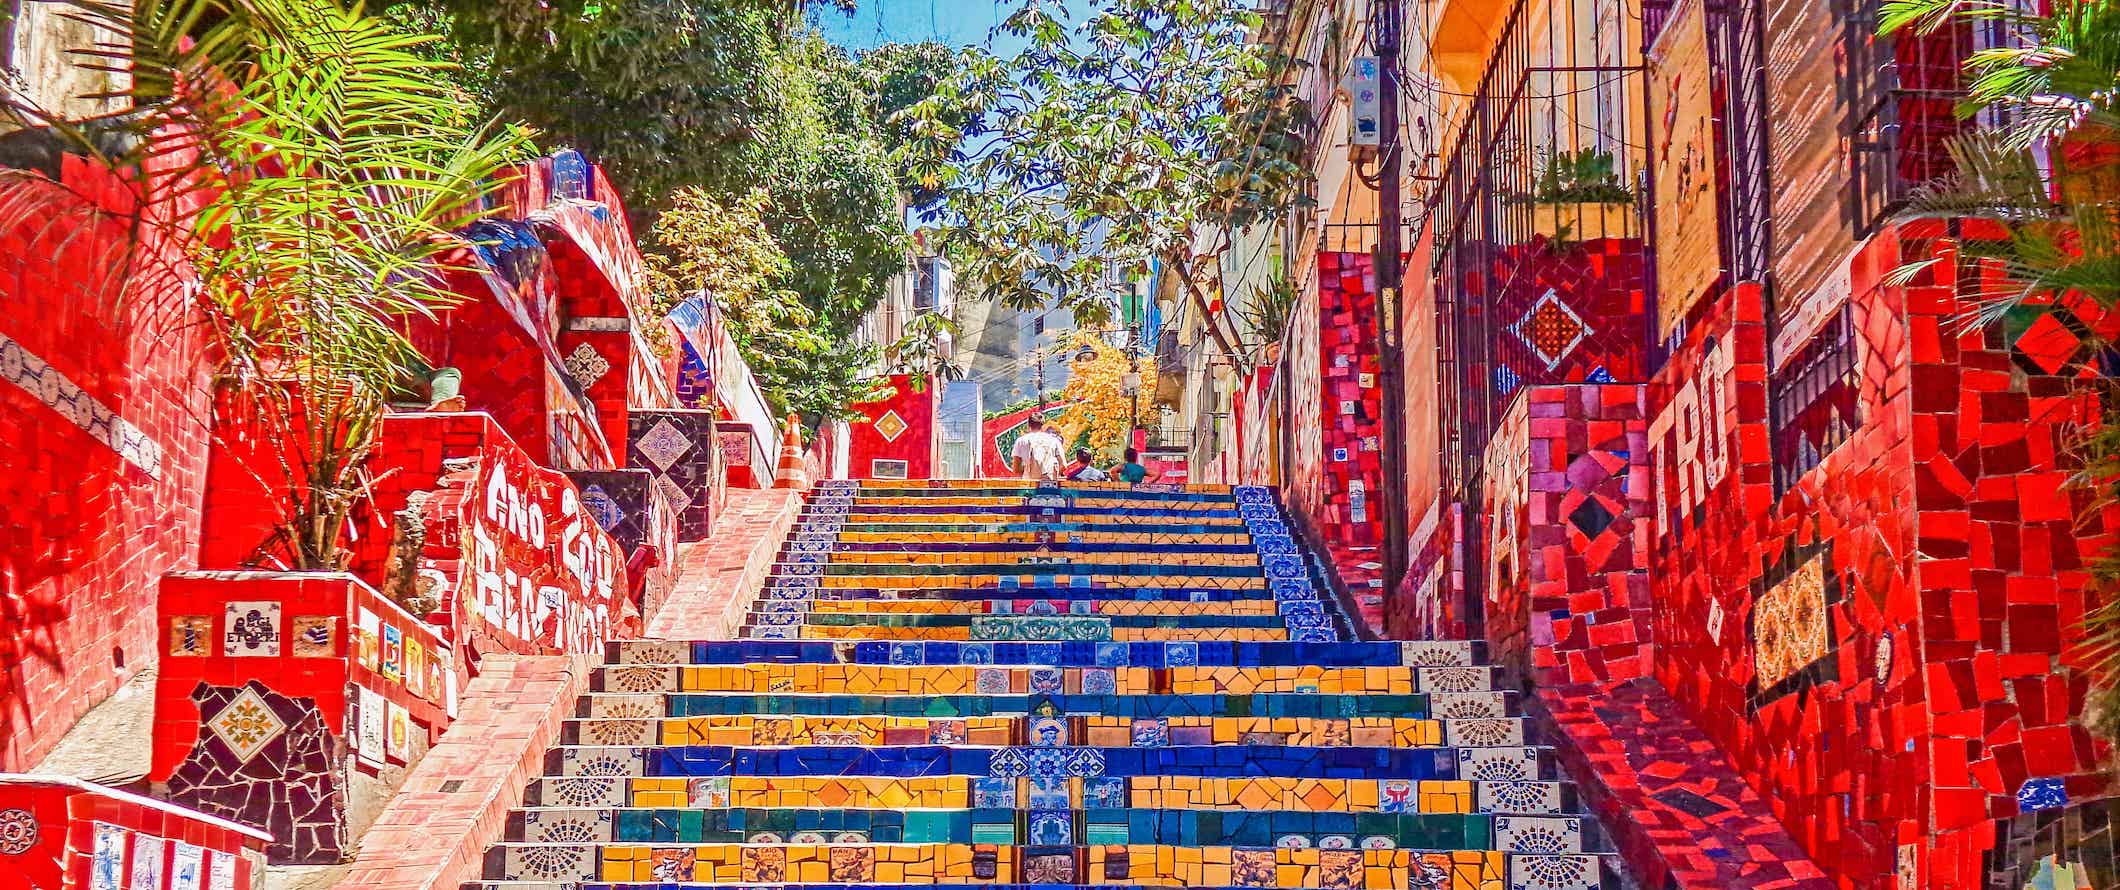 Brightly colored mosaic-lined stairs in Rio de Janeiro, Brazil